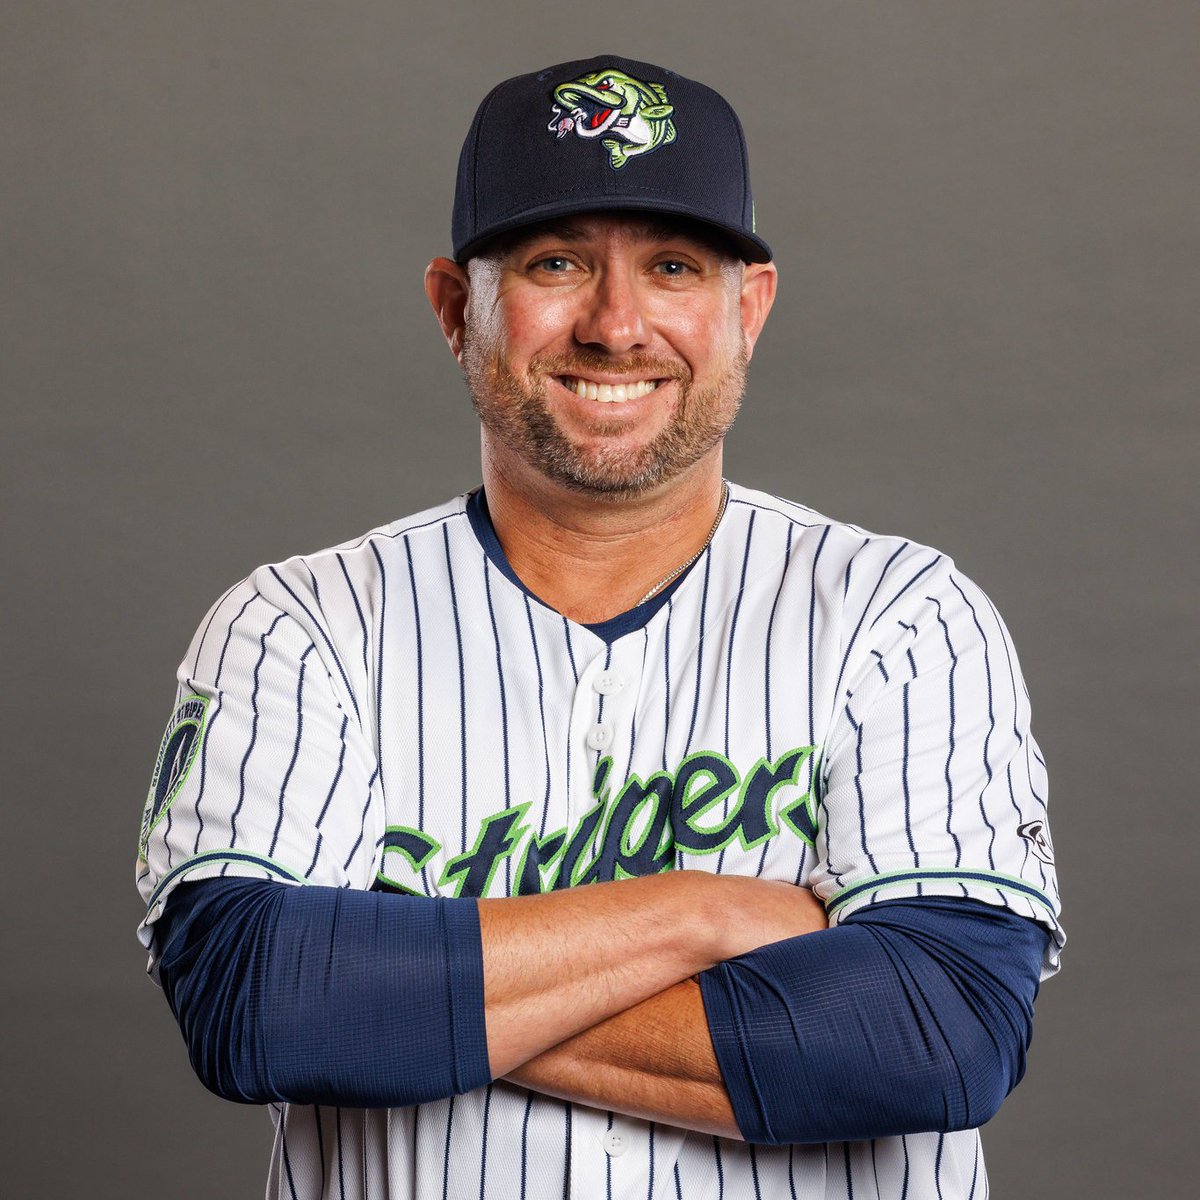 New @GoStripers hitting coach Dan DeMent joins me for the @CoolrayServices Pregame Show at 5:50pm, ahead of the 6:05pm game vs. Memphis. In part 1 of 2, we talk about his 15 years with the Rays, the big-leaguers he helped develop, and more. Listen at MyCountry993.com.